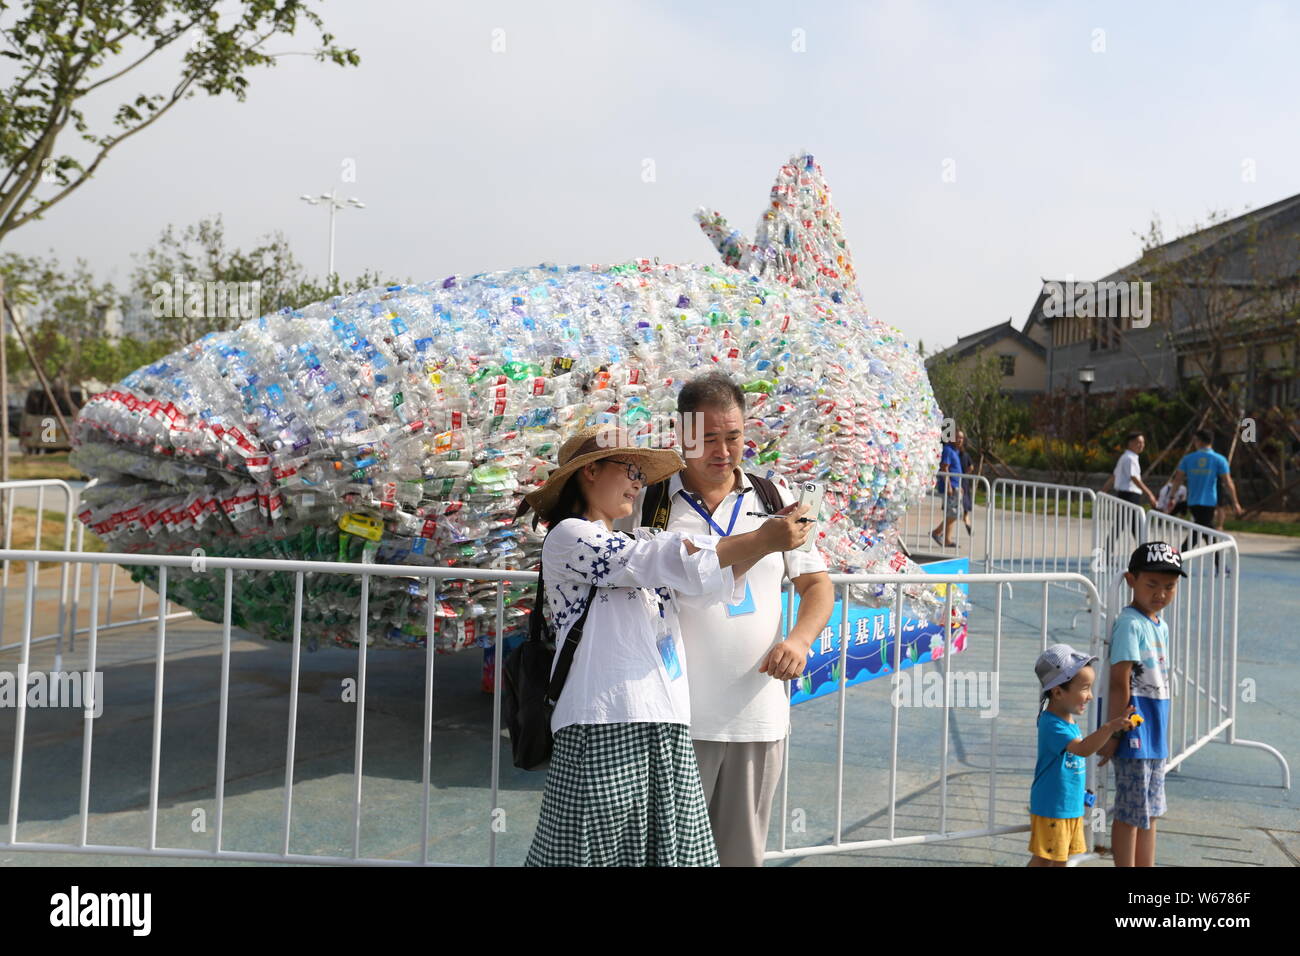 View of a 'whale shark' made of waste plastic bottles to raise awareness of environmental protection at the Rizhao Ocean Park in Rizhao city, east Chi Stock Photo